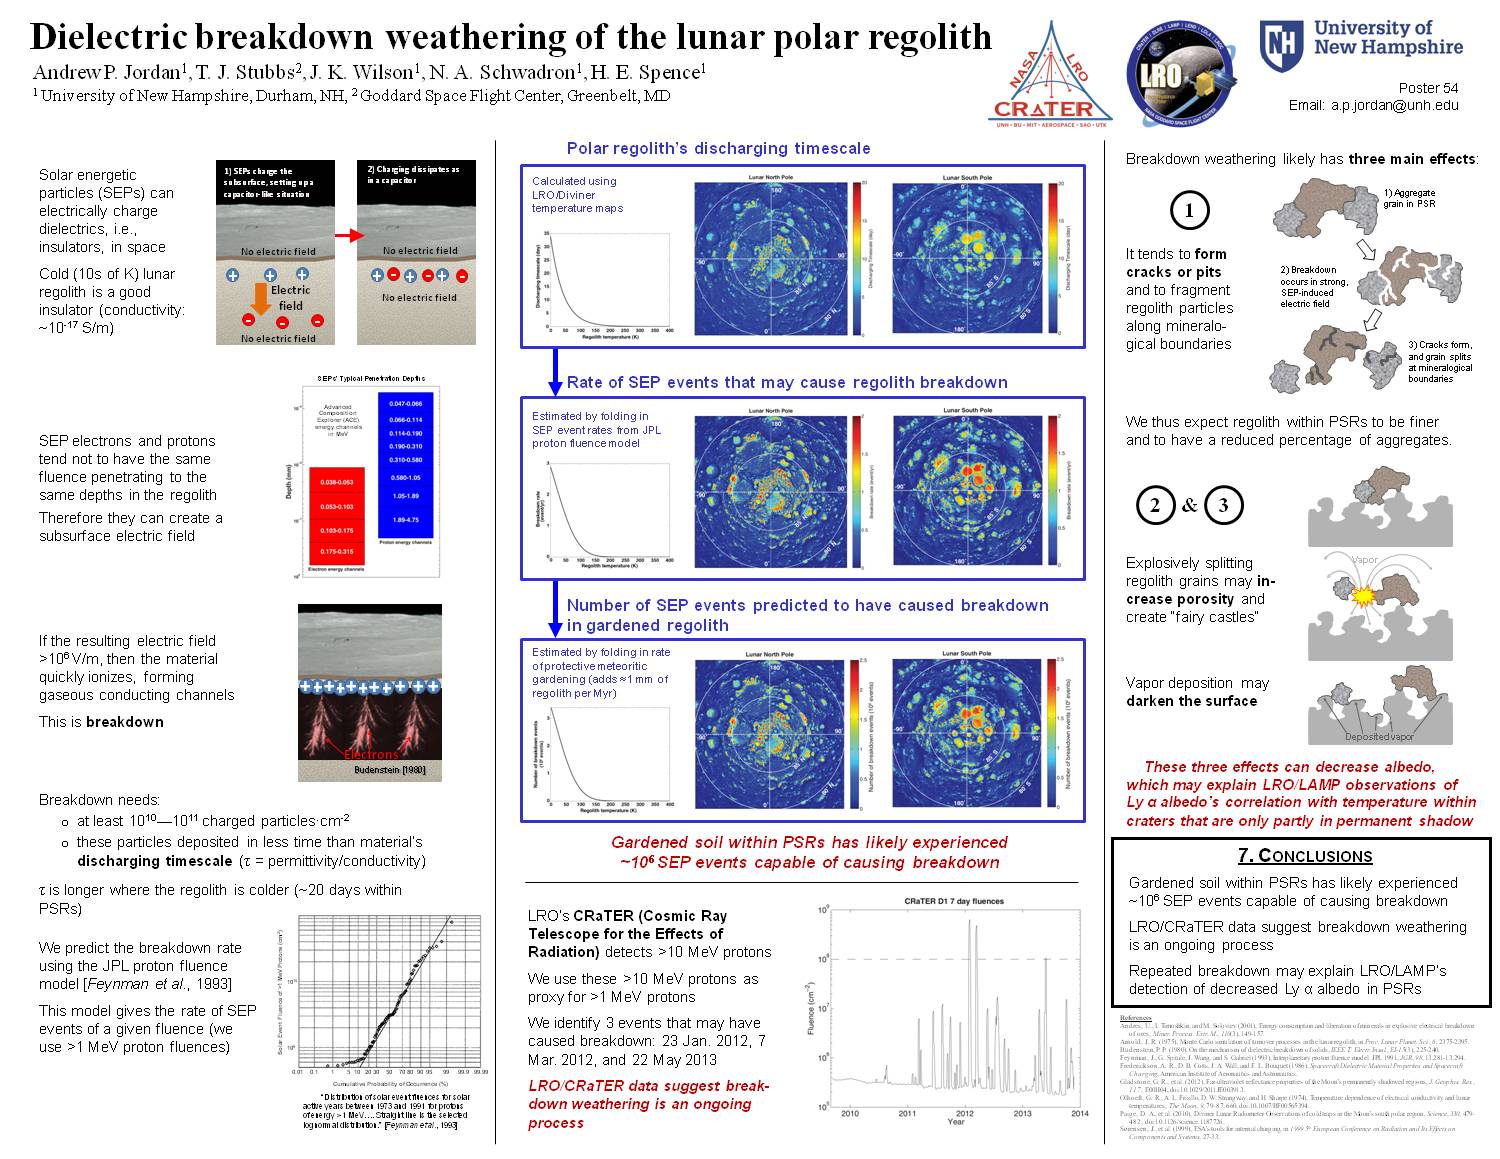 Dielectric Breakdown Weathering Of The Lunar Polar Regolith by api44